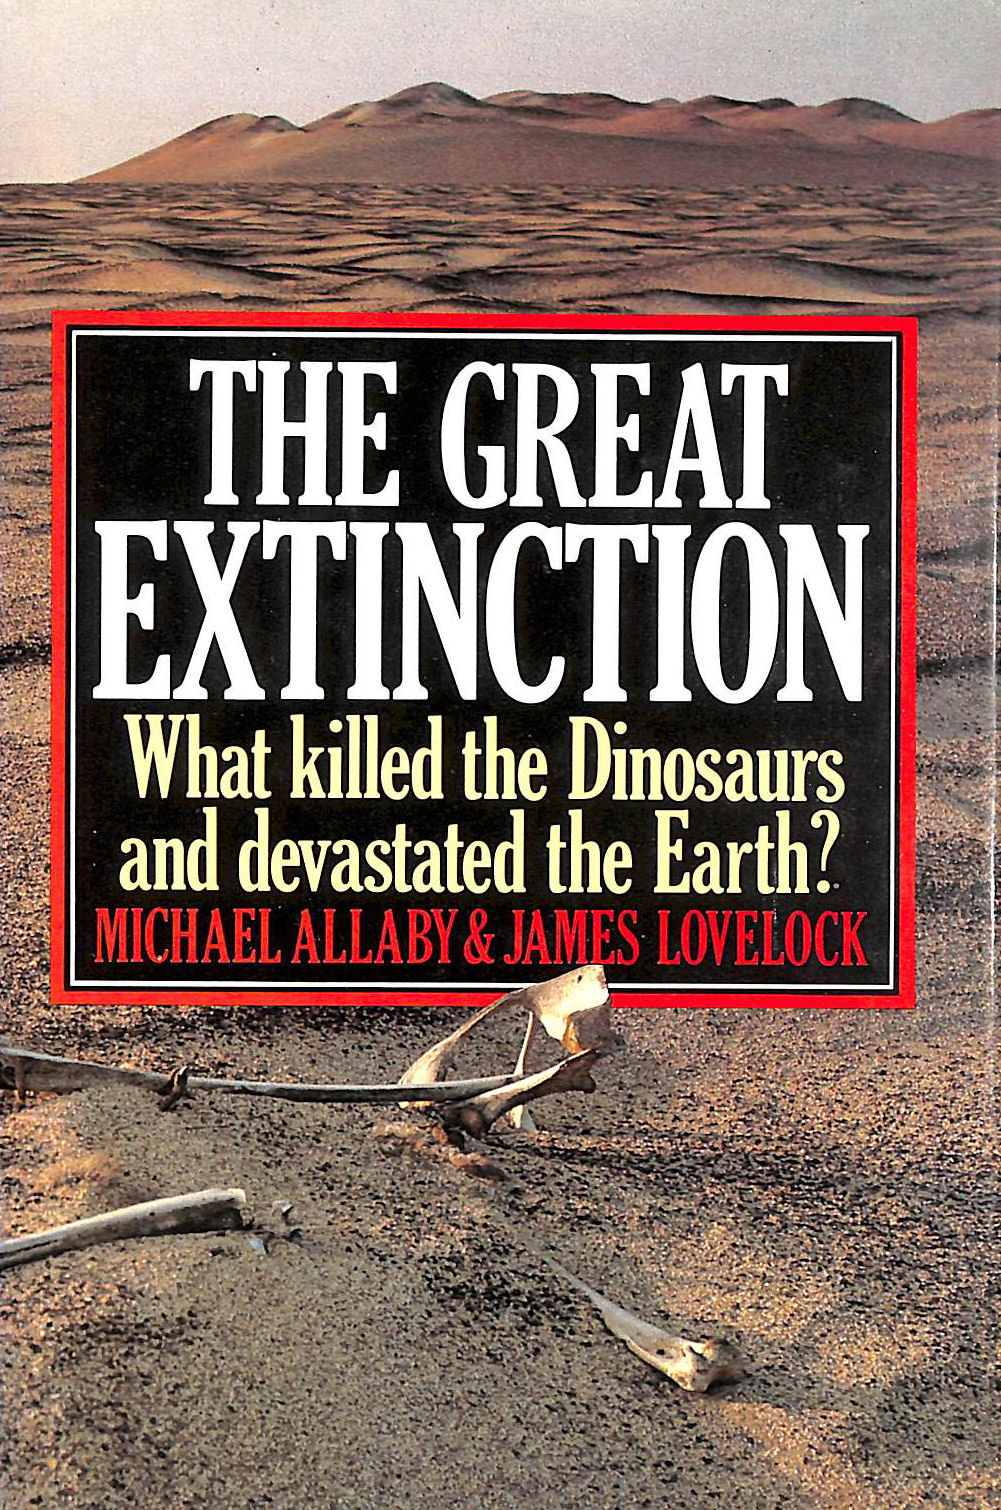 ALLABY, MICHAEL & JAMES LOVELOCK. - THE GREAT EXTINCTION: WHAT KILLED THE DINOSAURS AND DEVASTATED THE EARTH?